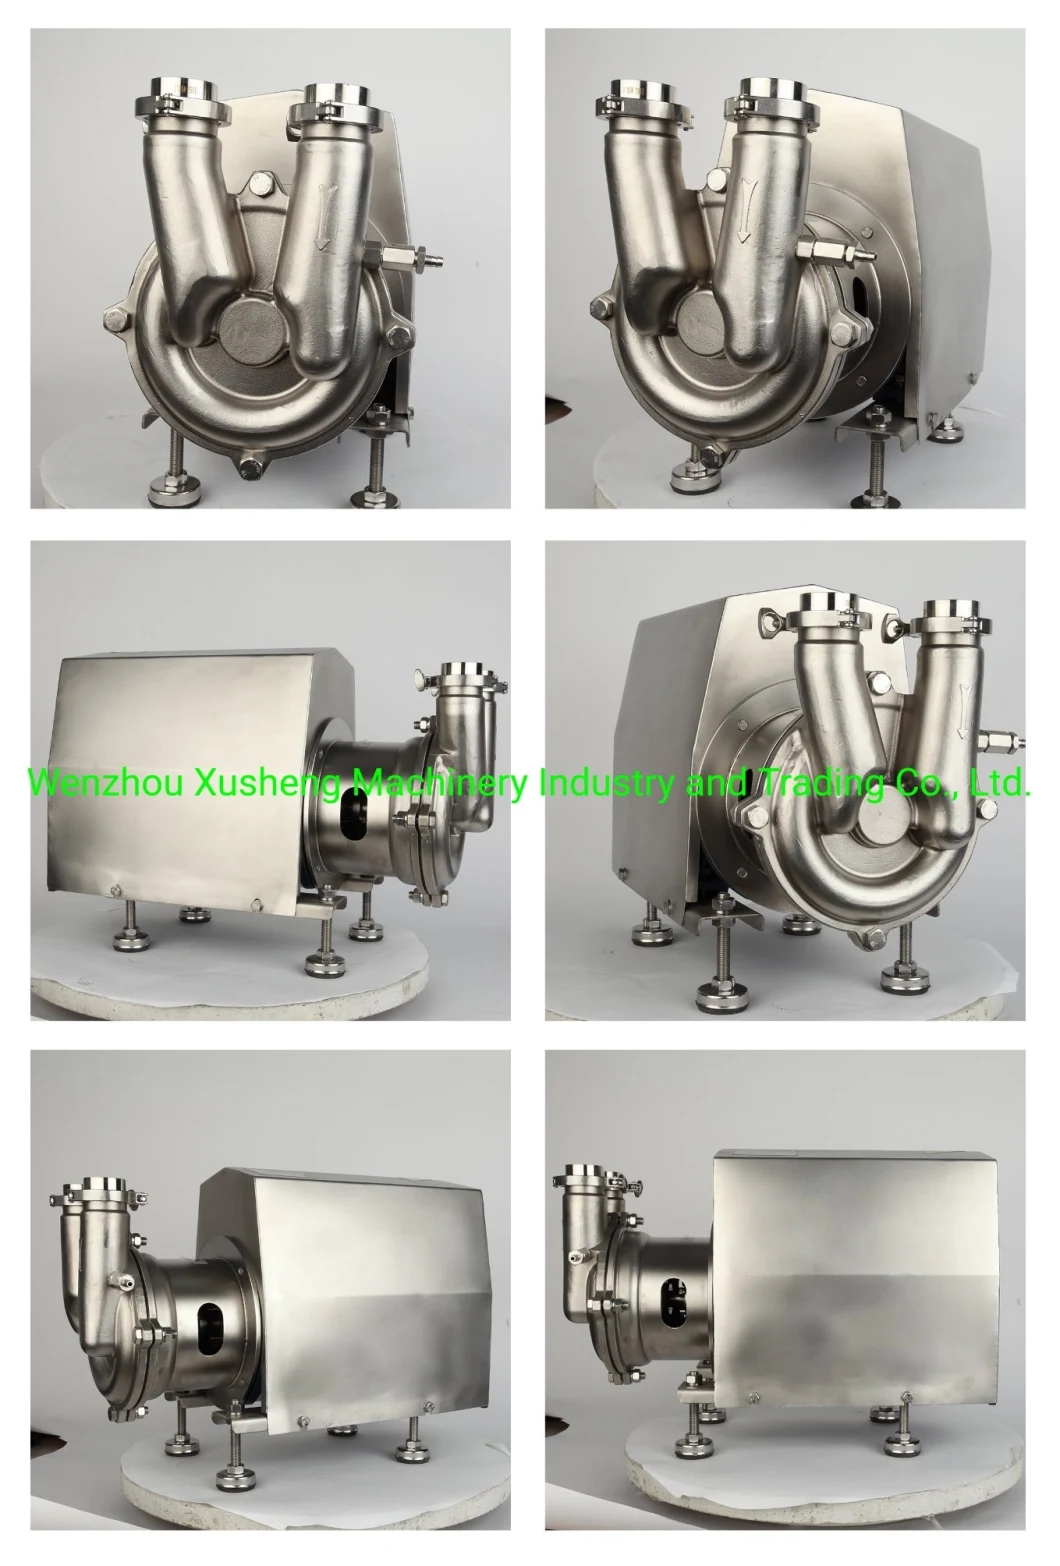 Sanitary-Stainless-Steel-SS316L-Pump-Liquid-CIP-Recycling-Self-Priming-Centrifugal-Pump.webp